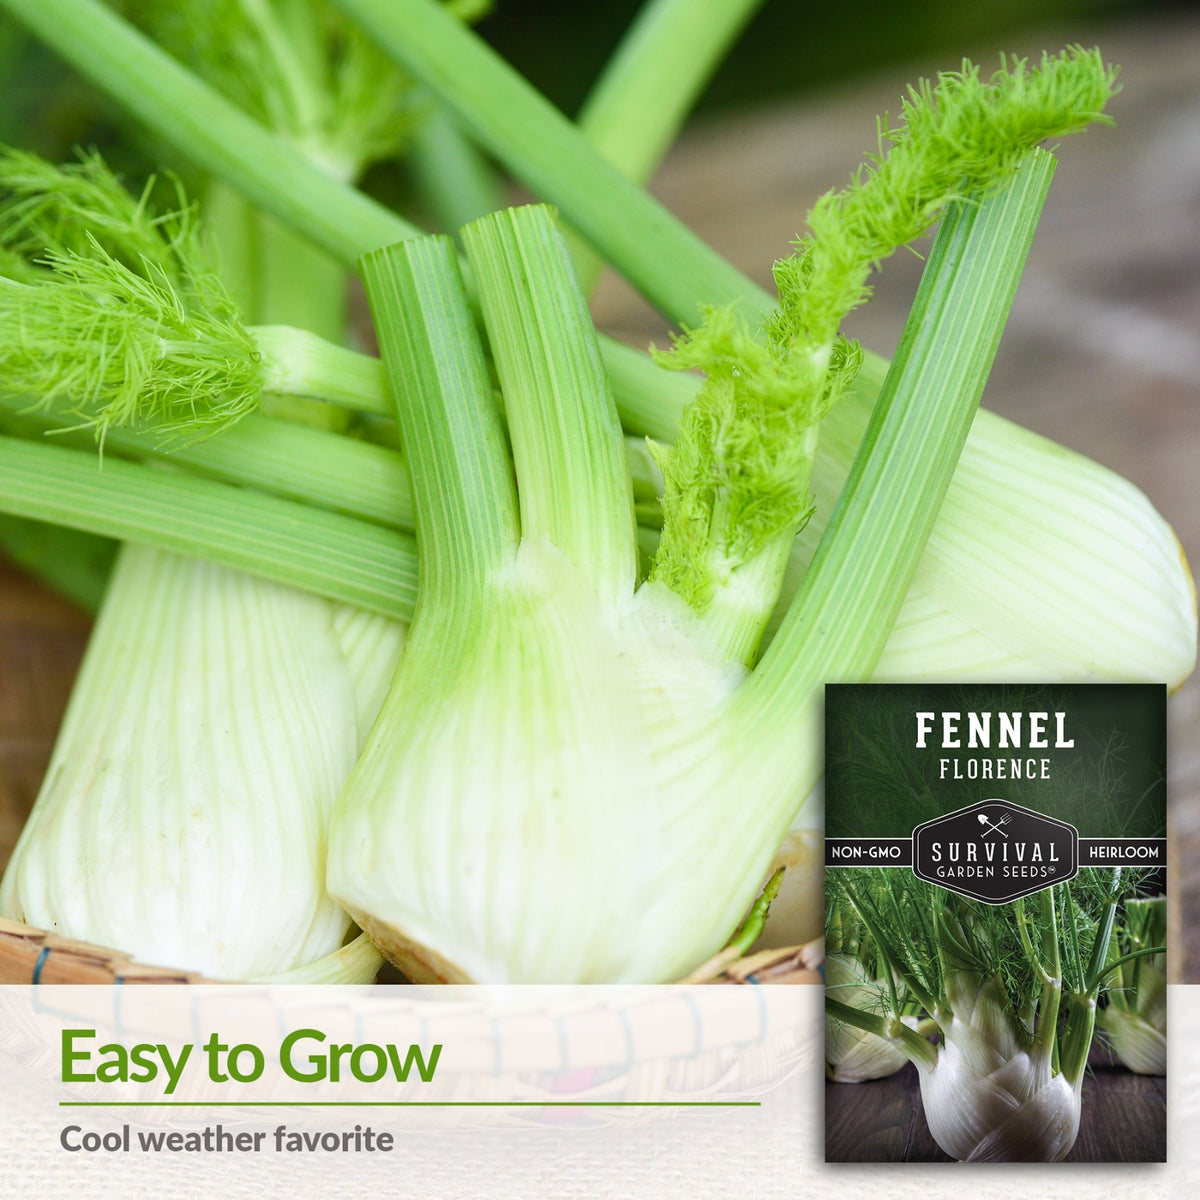 Fennel is an easy to grow cool weather favorite